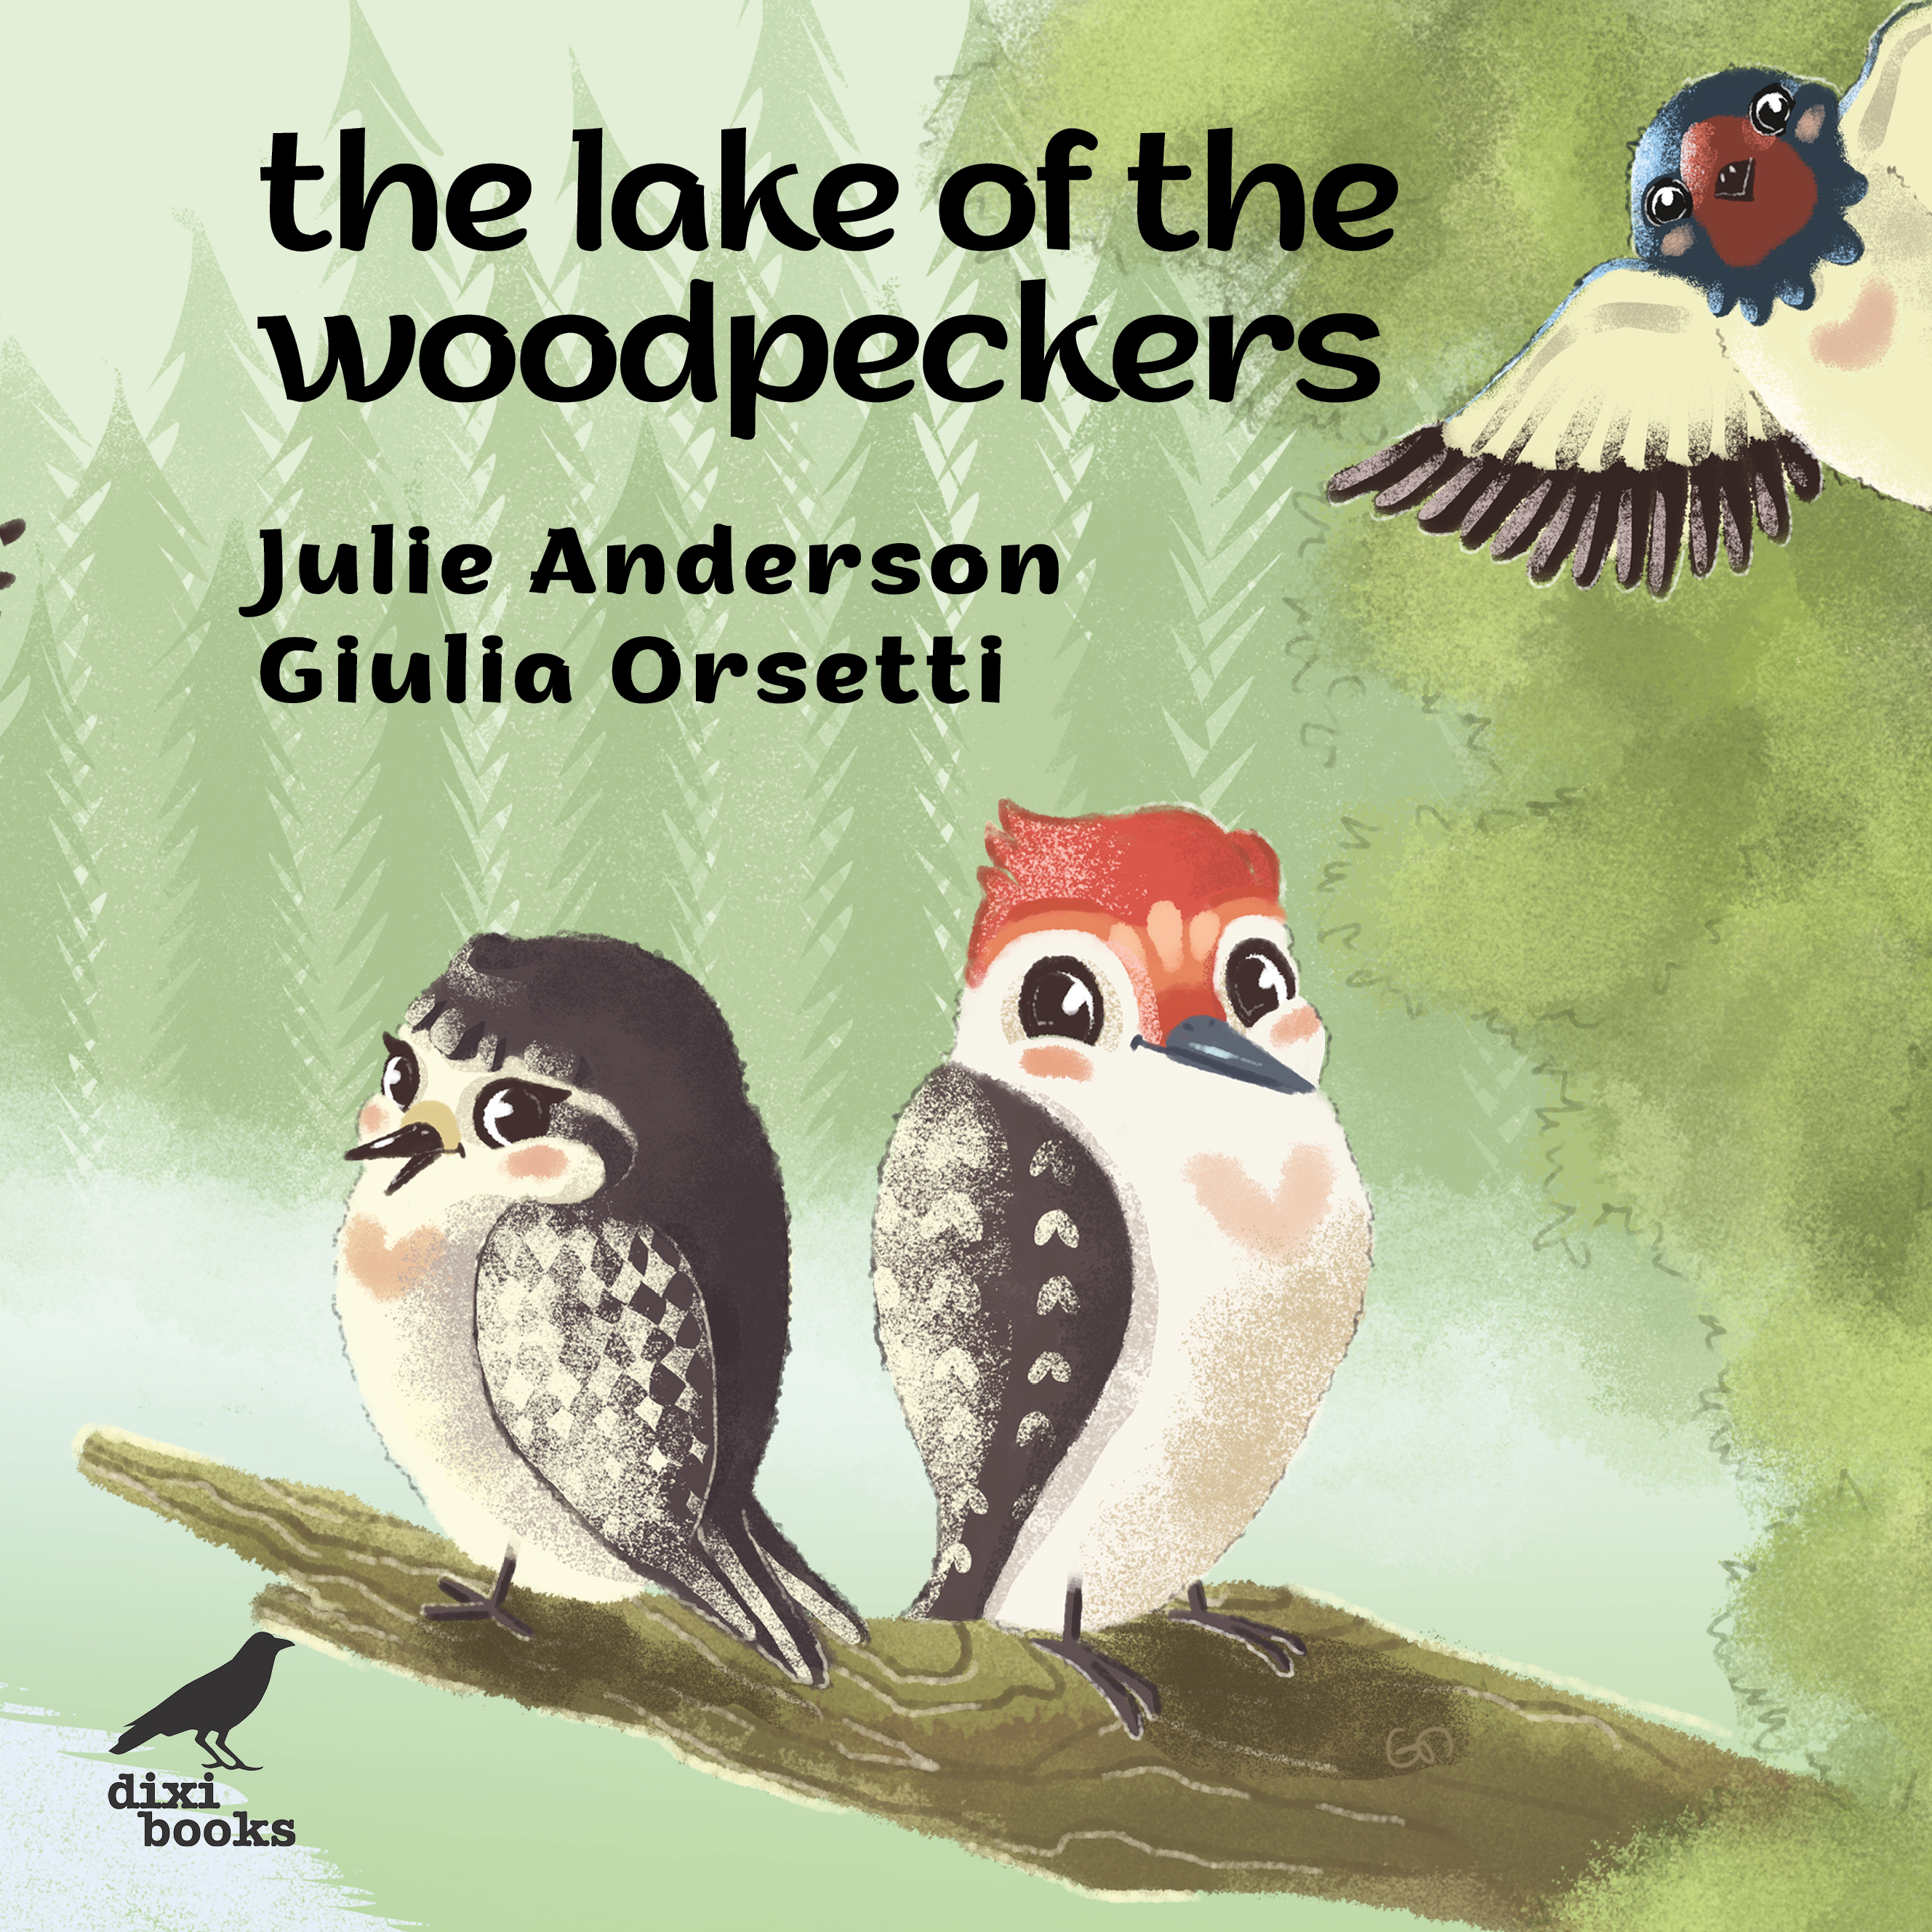 The Lake of the Woodpeckers